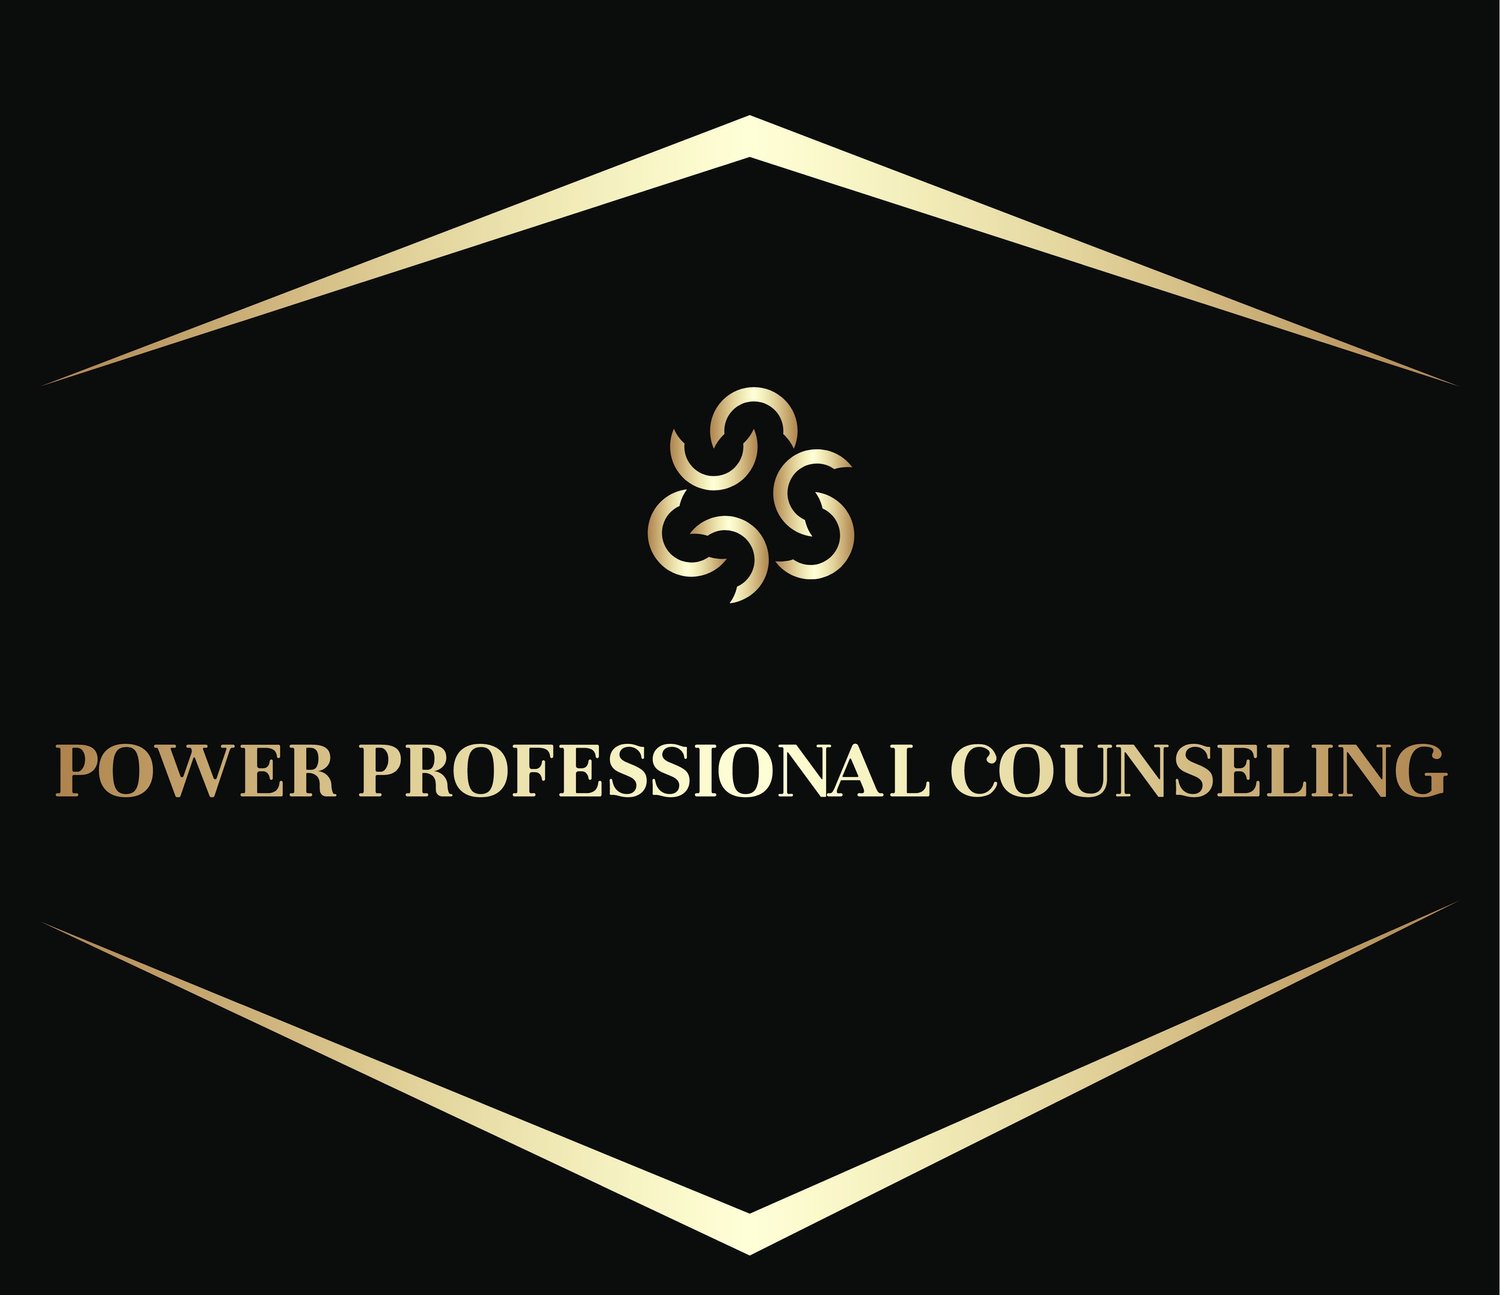 Power Professional Counseling